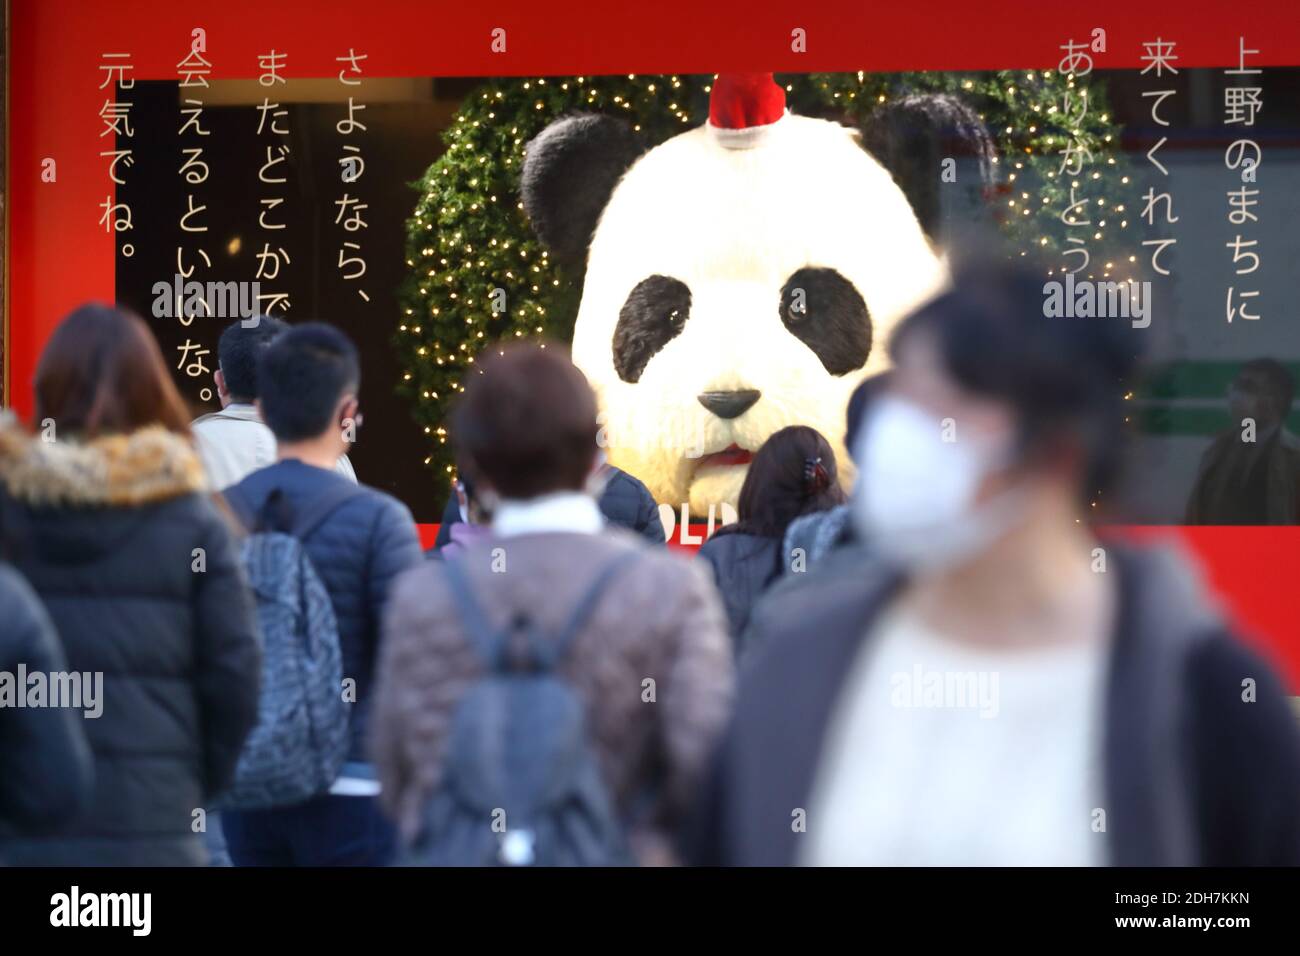 Thank-You celebration for popular female giant panda Xiang Xiang are displayed in Tokyo's Ueno area, Japan on December 9, 2020. Xiang Xiang is currently loaned to the Tokyo zoo by the Chinese government, and will be returned to China by December 31, 2020. (Photo by Naoki Nishimura/AFLO) Stock Photo